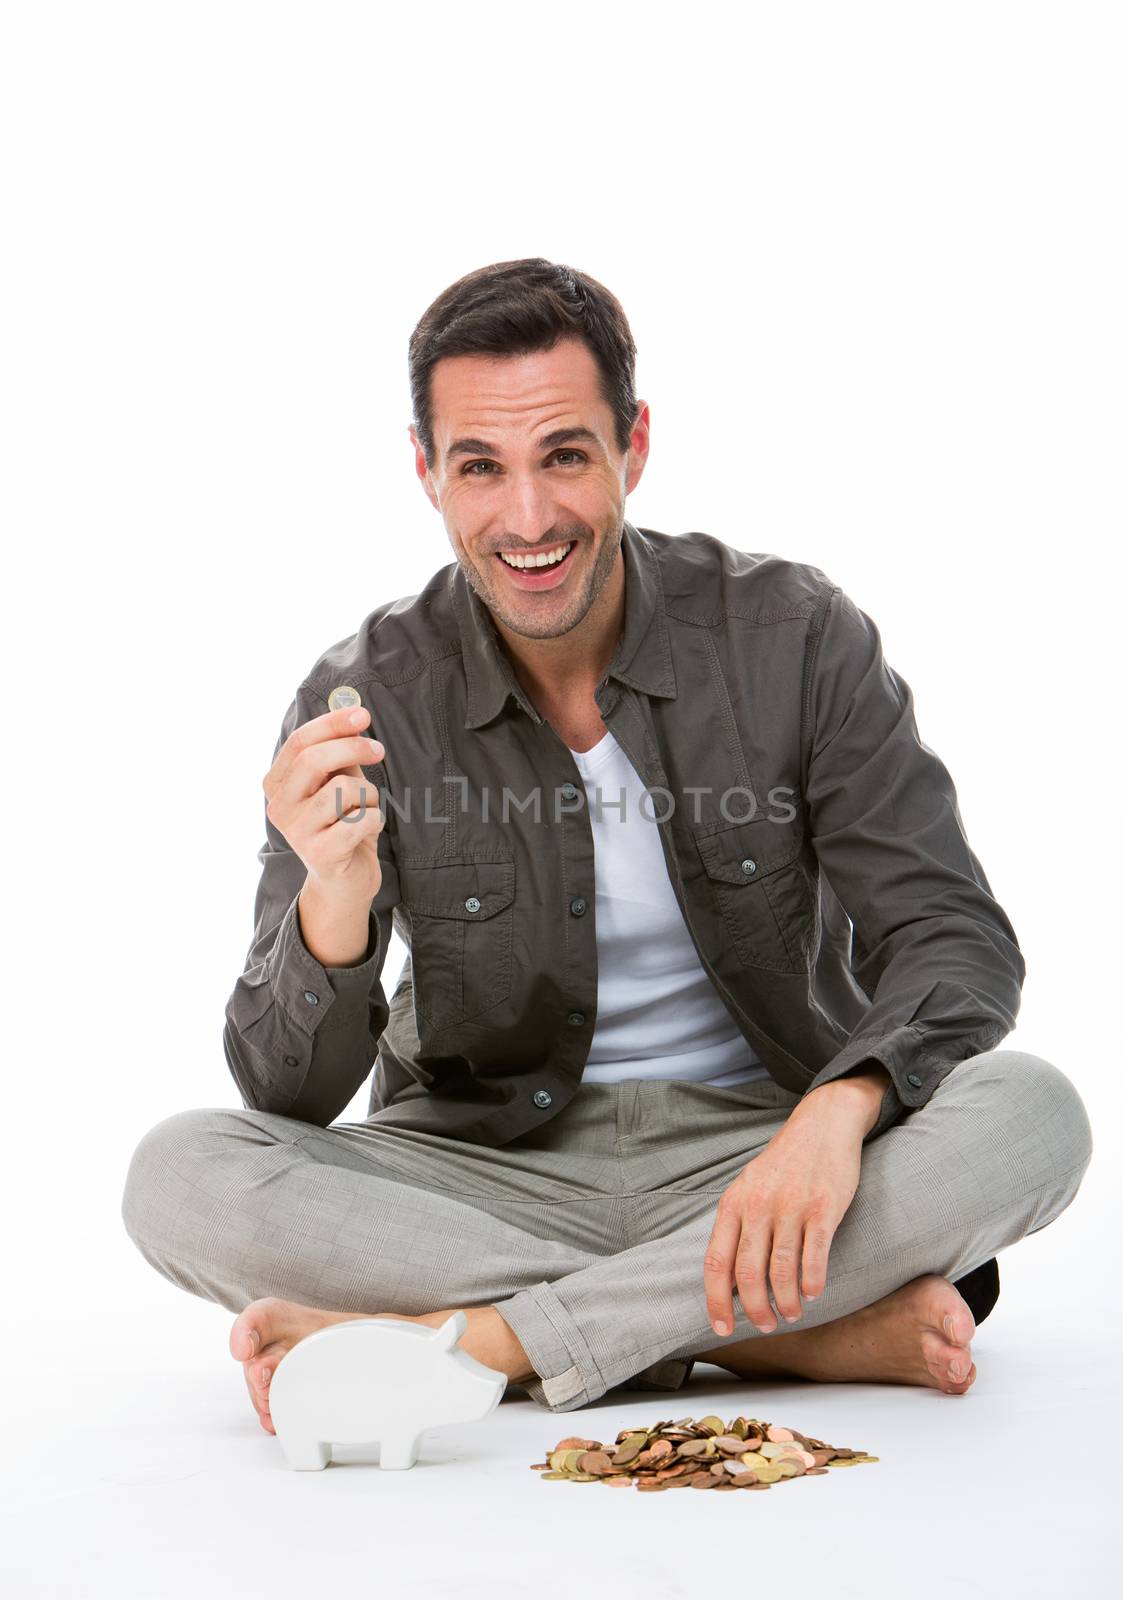 Man seated on the floor, smiling at camera, holding a coin